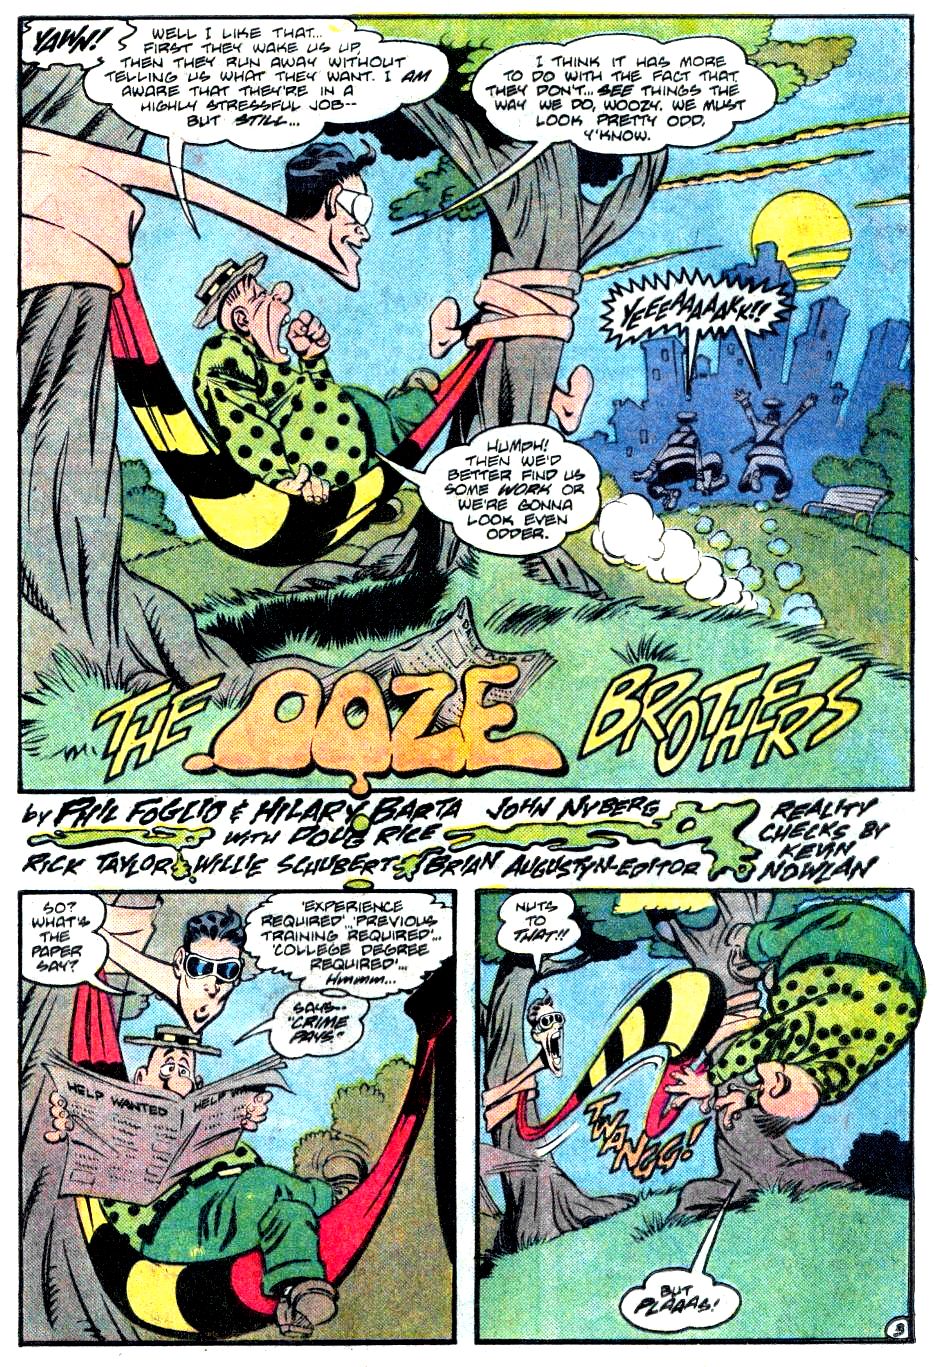 Plastic Man (1988) issue 2 - Page 4